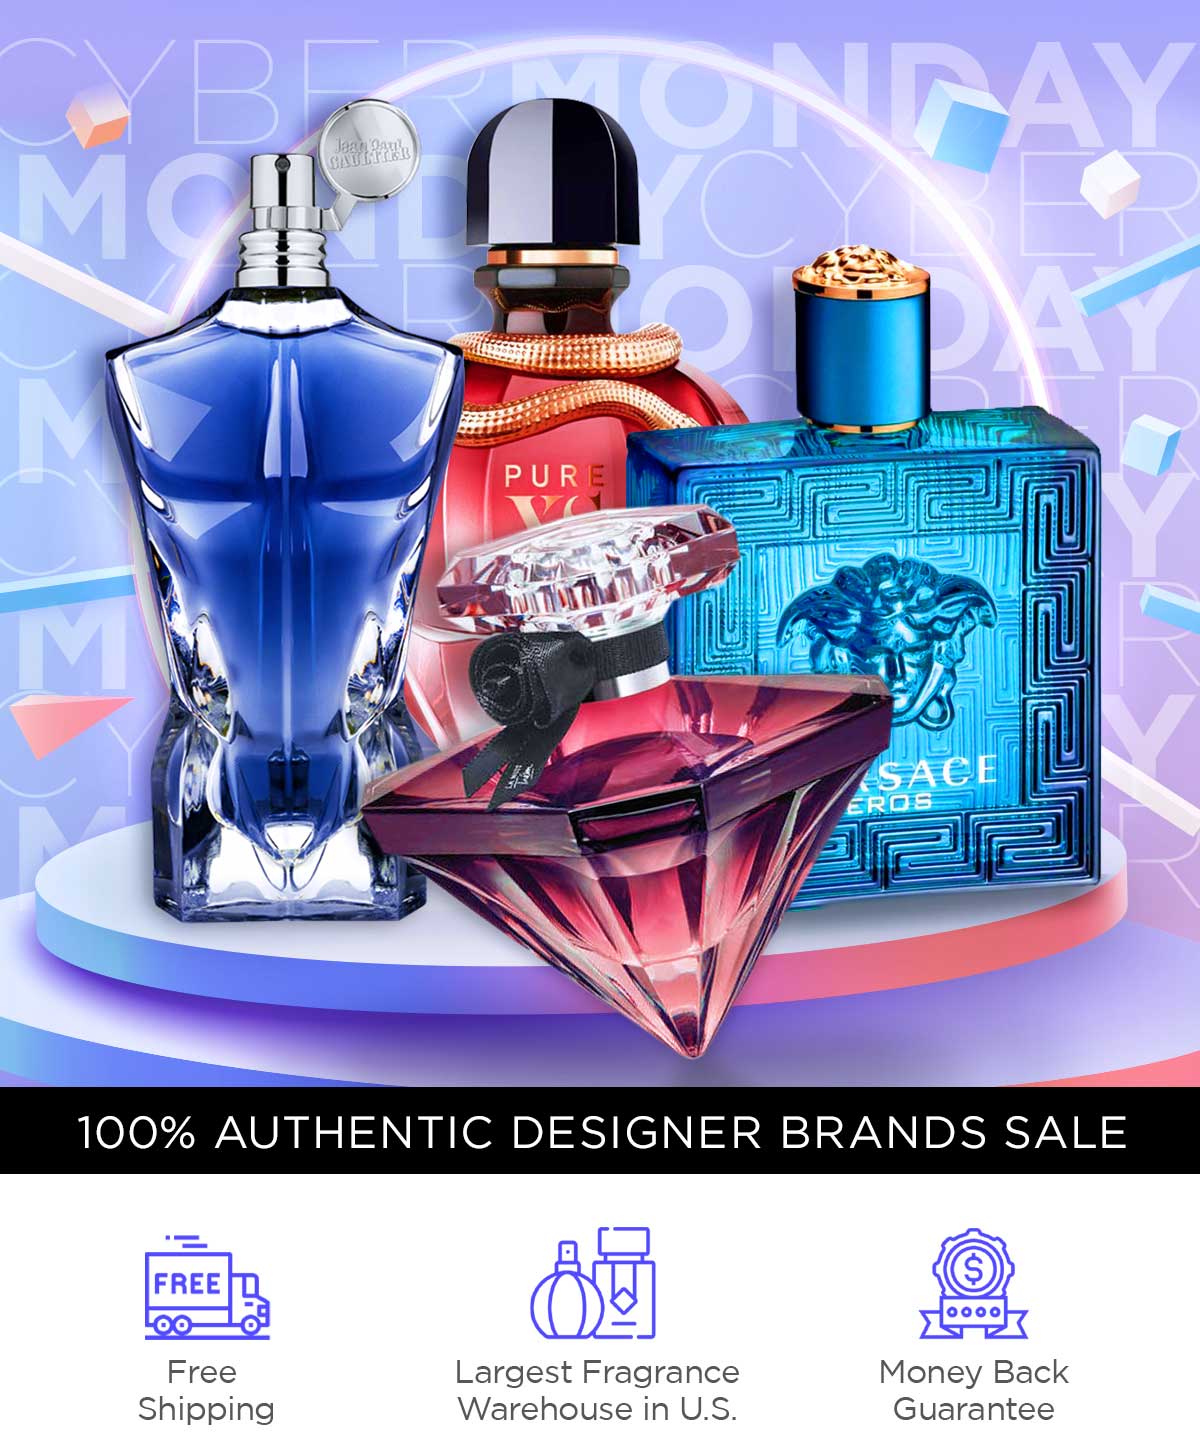 Best selling perfumes and colognes displayed on a pedestal during Cyber Monday sale